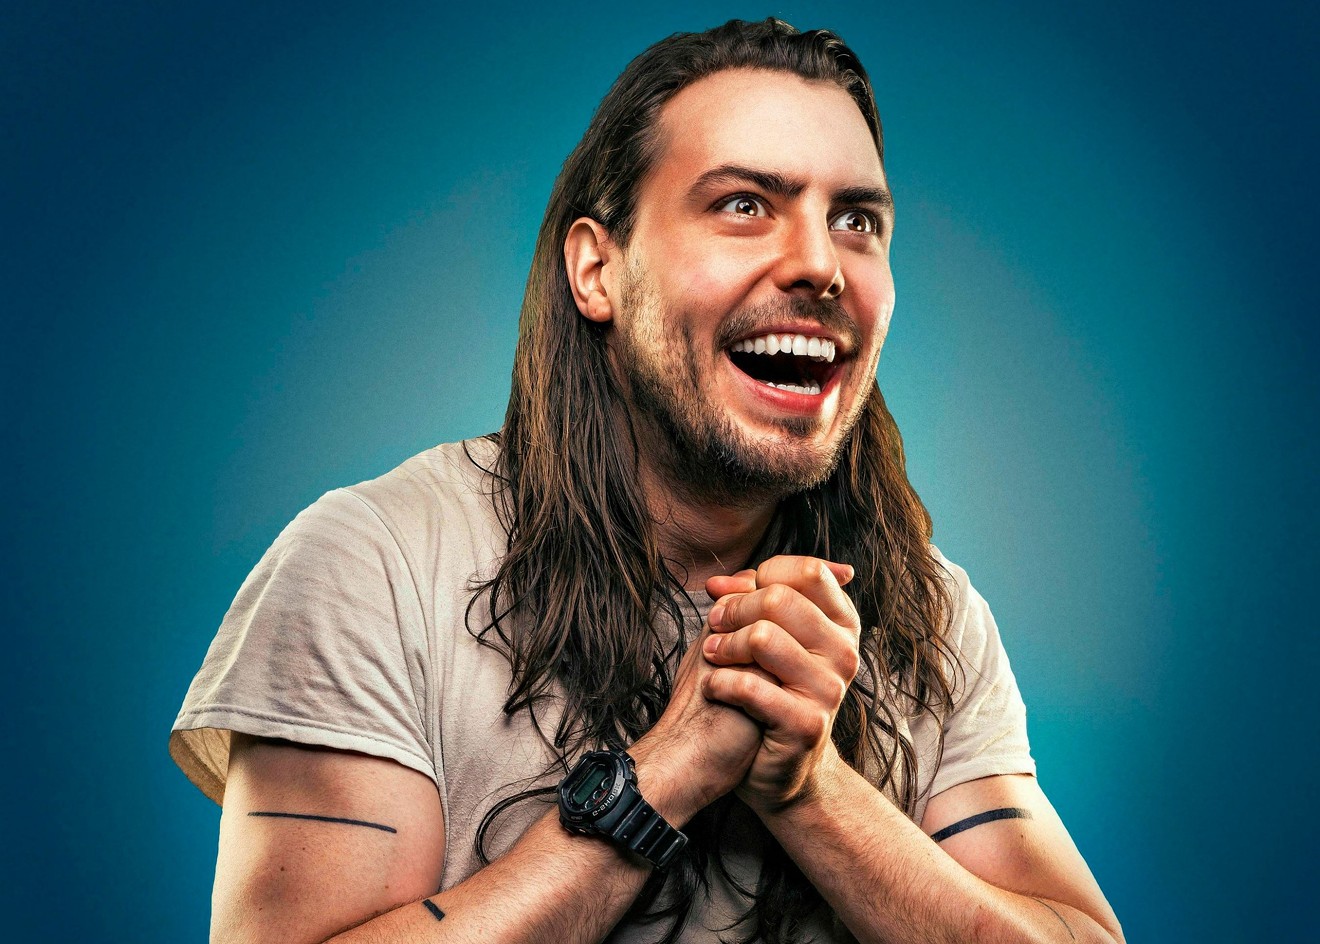 Get ready to party. Andrew W.K.'s coming to town.